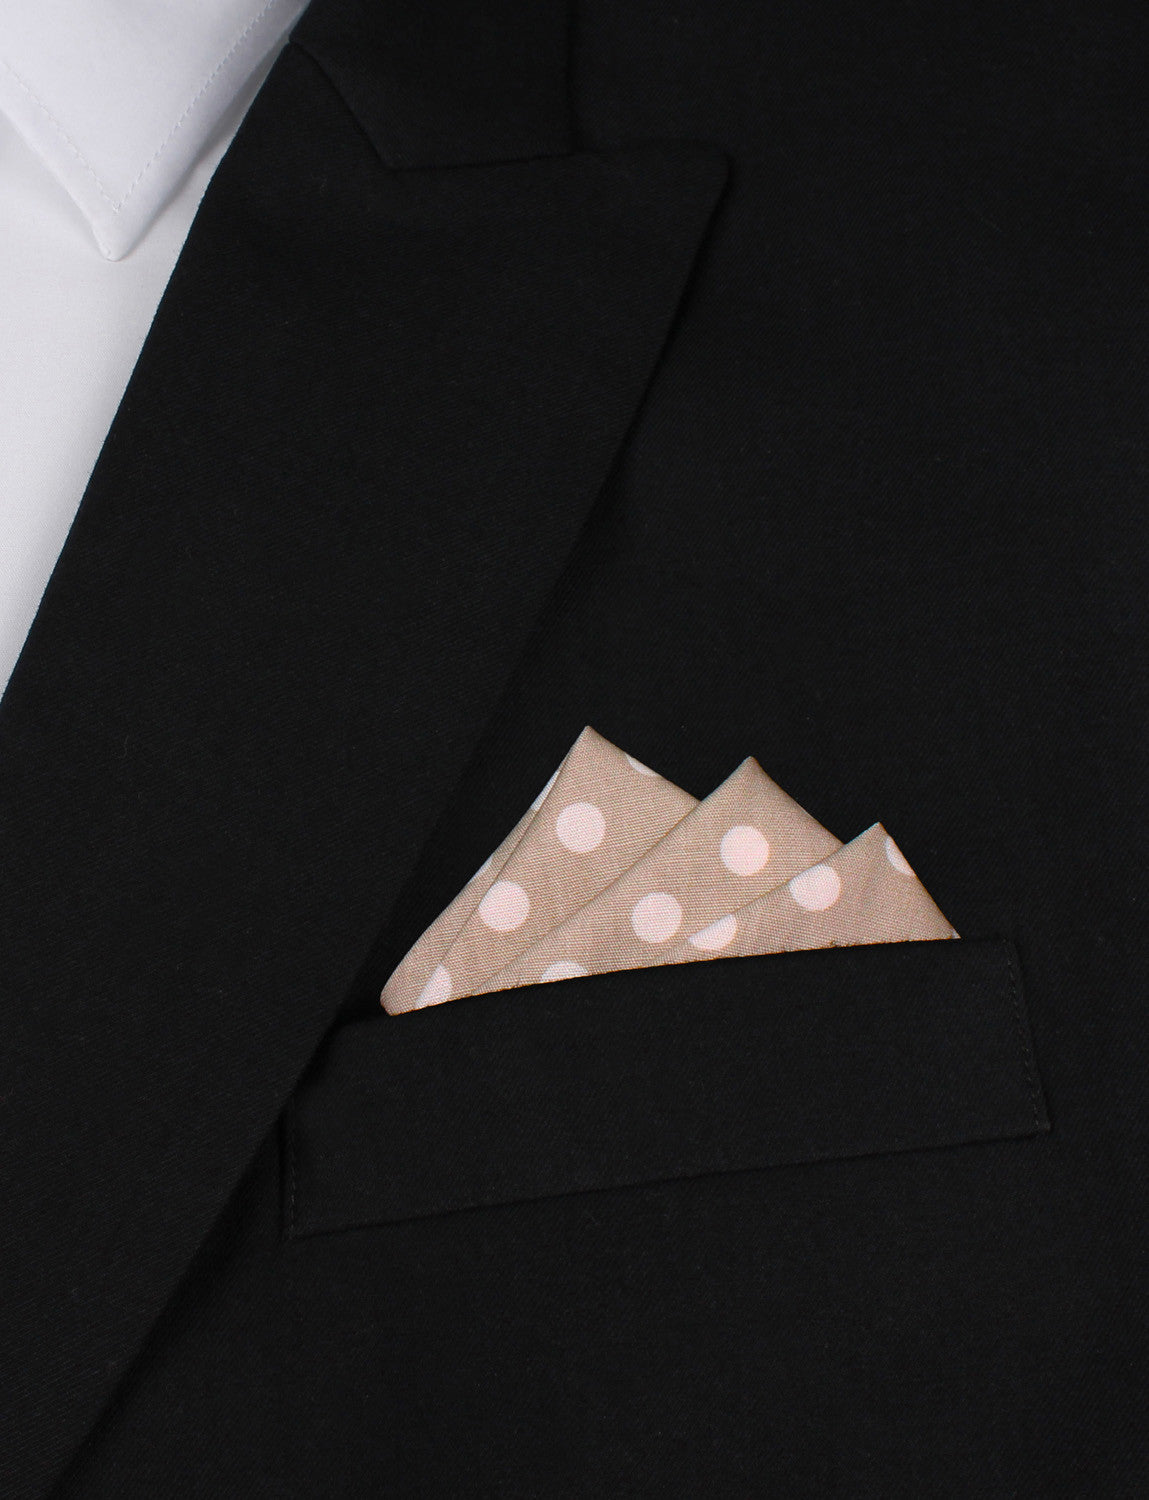 Light Grey with Large White Polka Dots Oxygen Three Point Pocket Square Fold